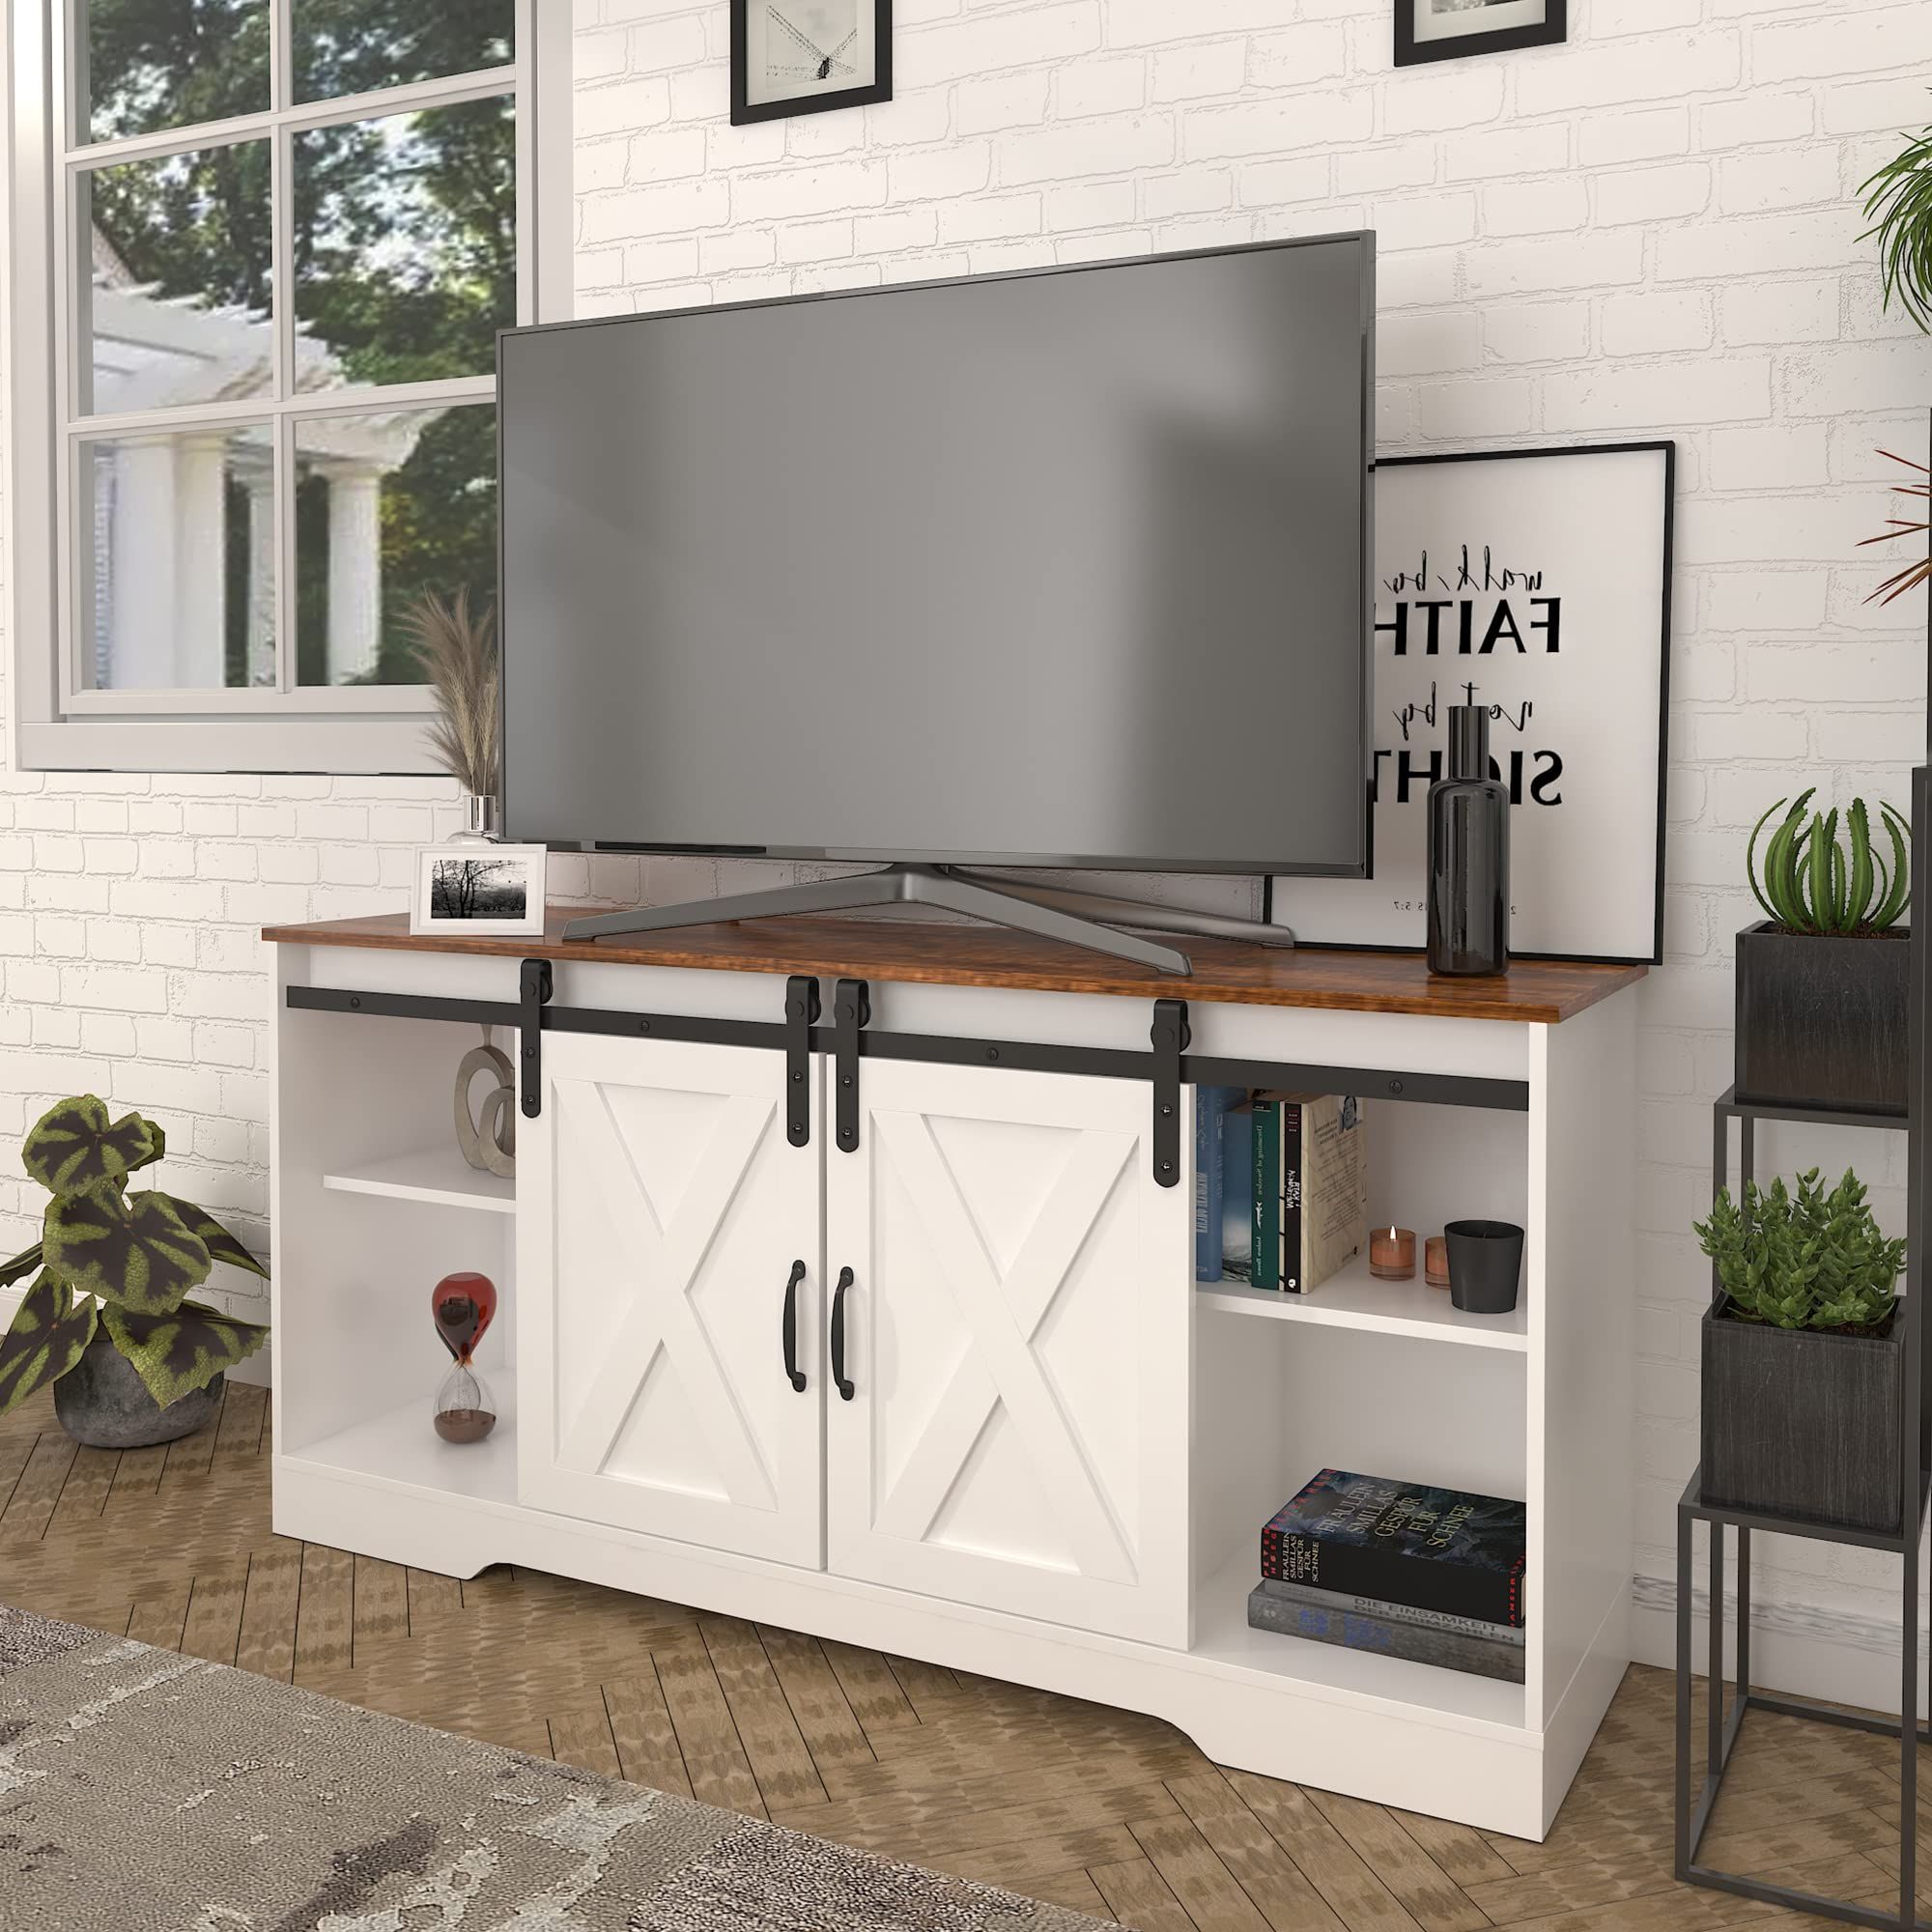 2019 Joysource Farmhouse Tv Stand Wood Sliding Barn Doors Entertainment Inside Farmhouse Stands With Shelves (View 8 of 15)